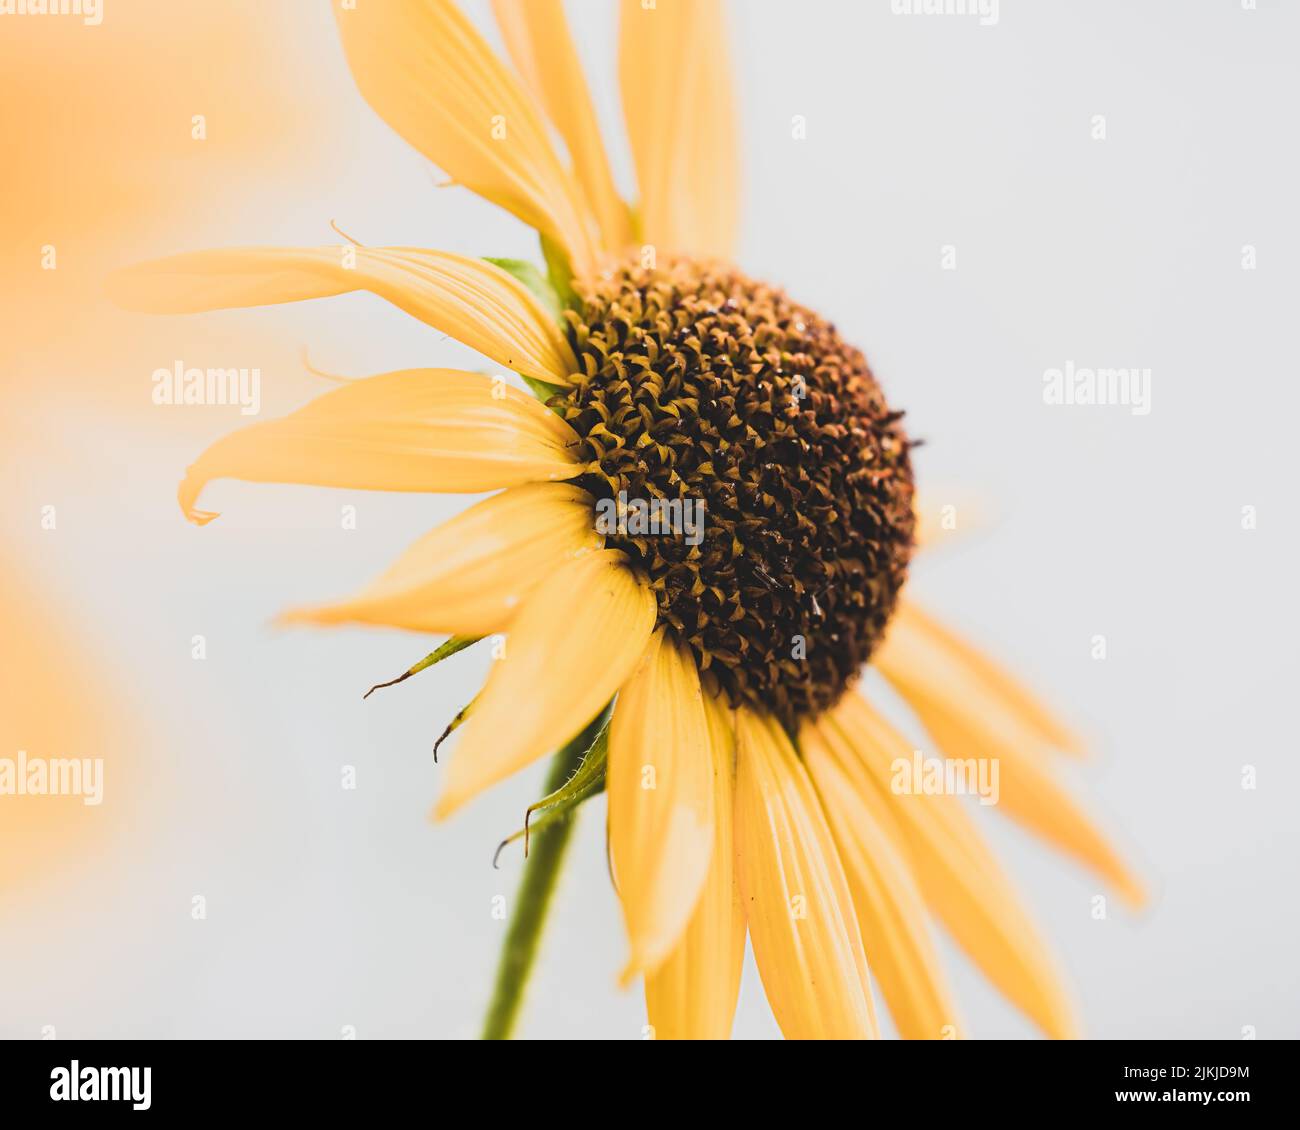 A closeup of a bright yellow sunflower. Stock Photo